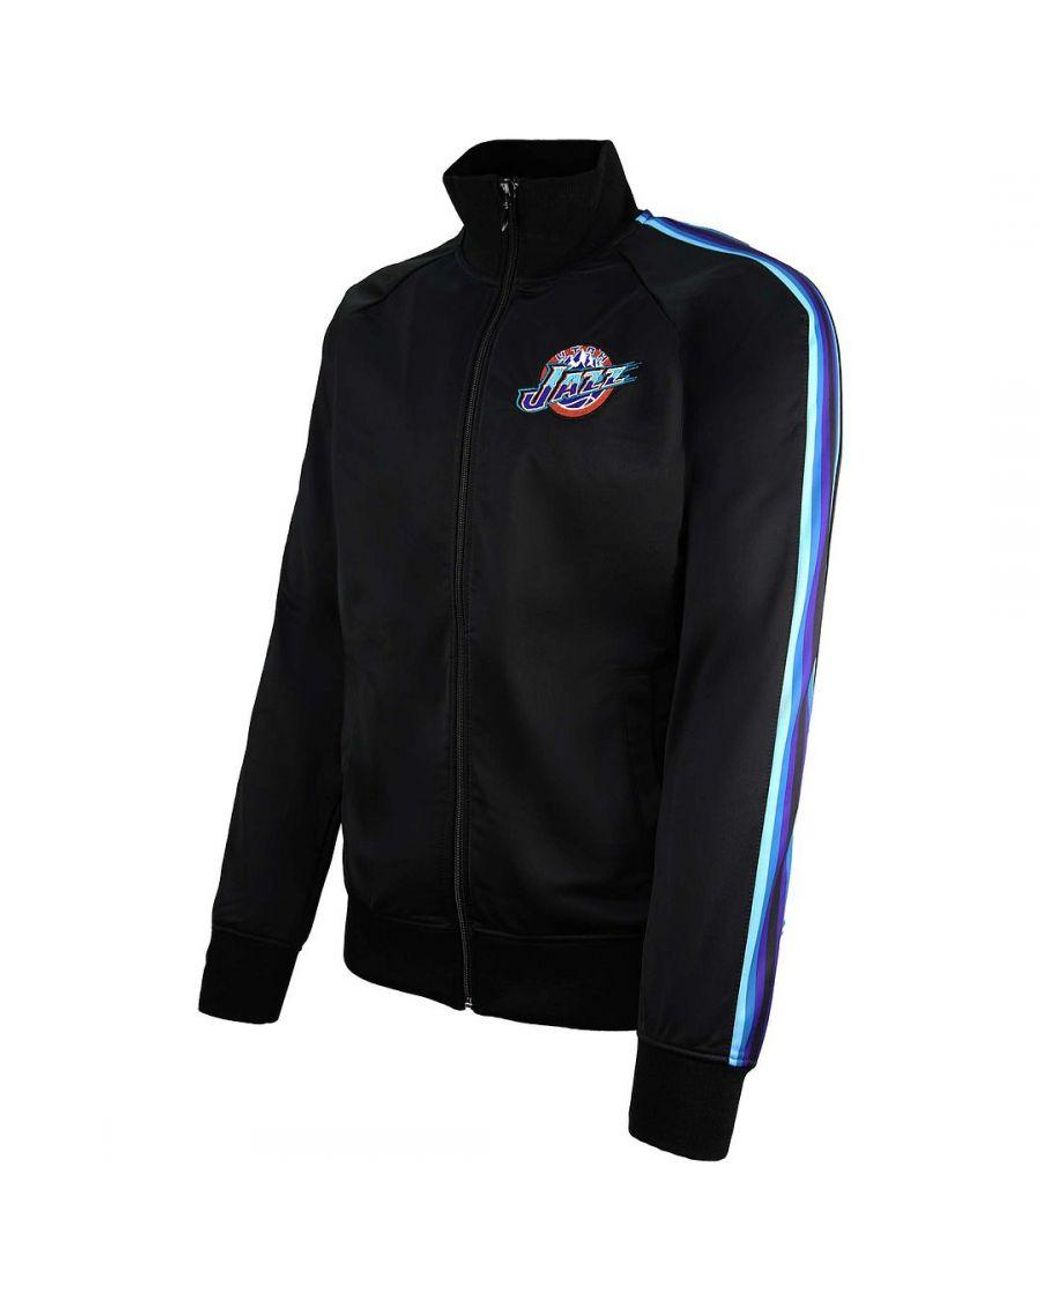 Official San Antonio Spurs Jackets, Track Jackets, Pullovers, Coats